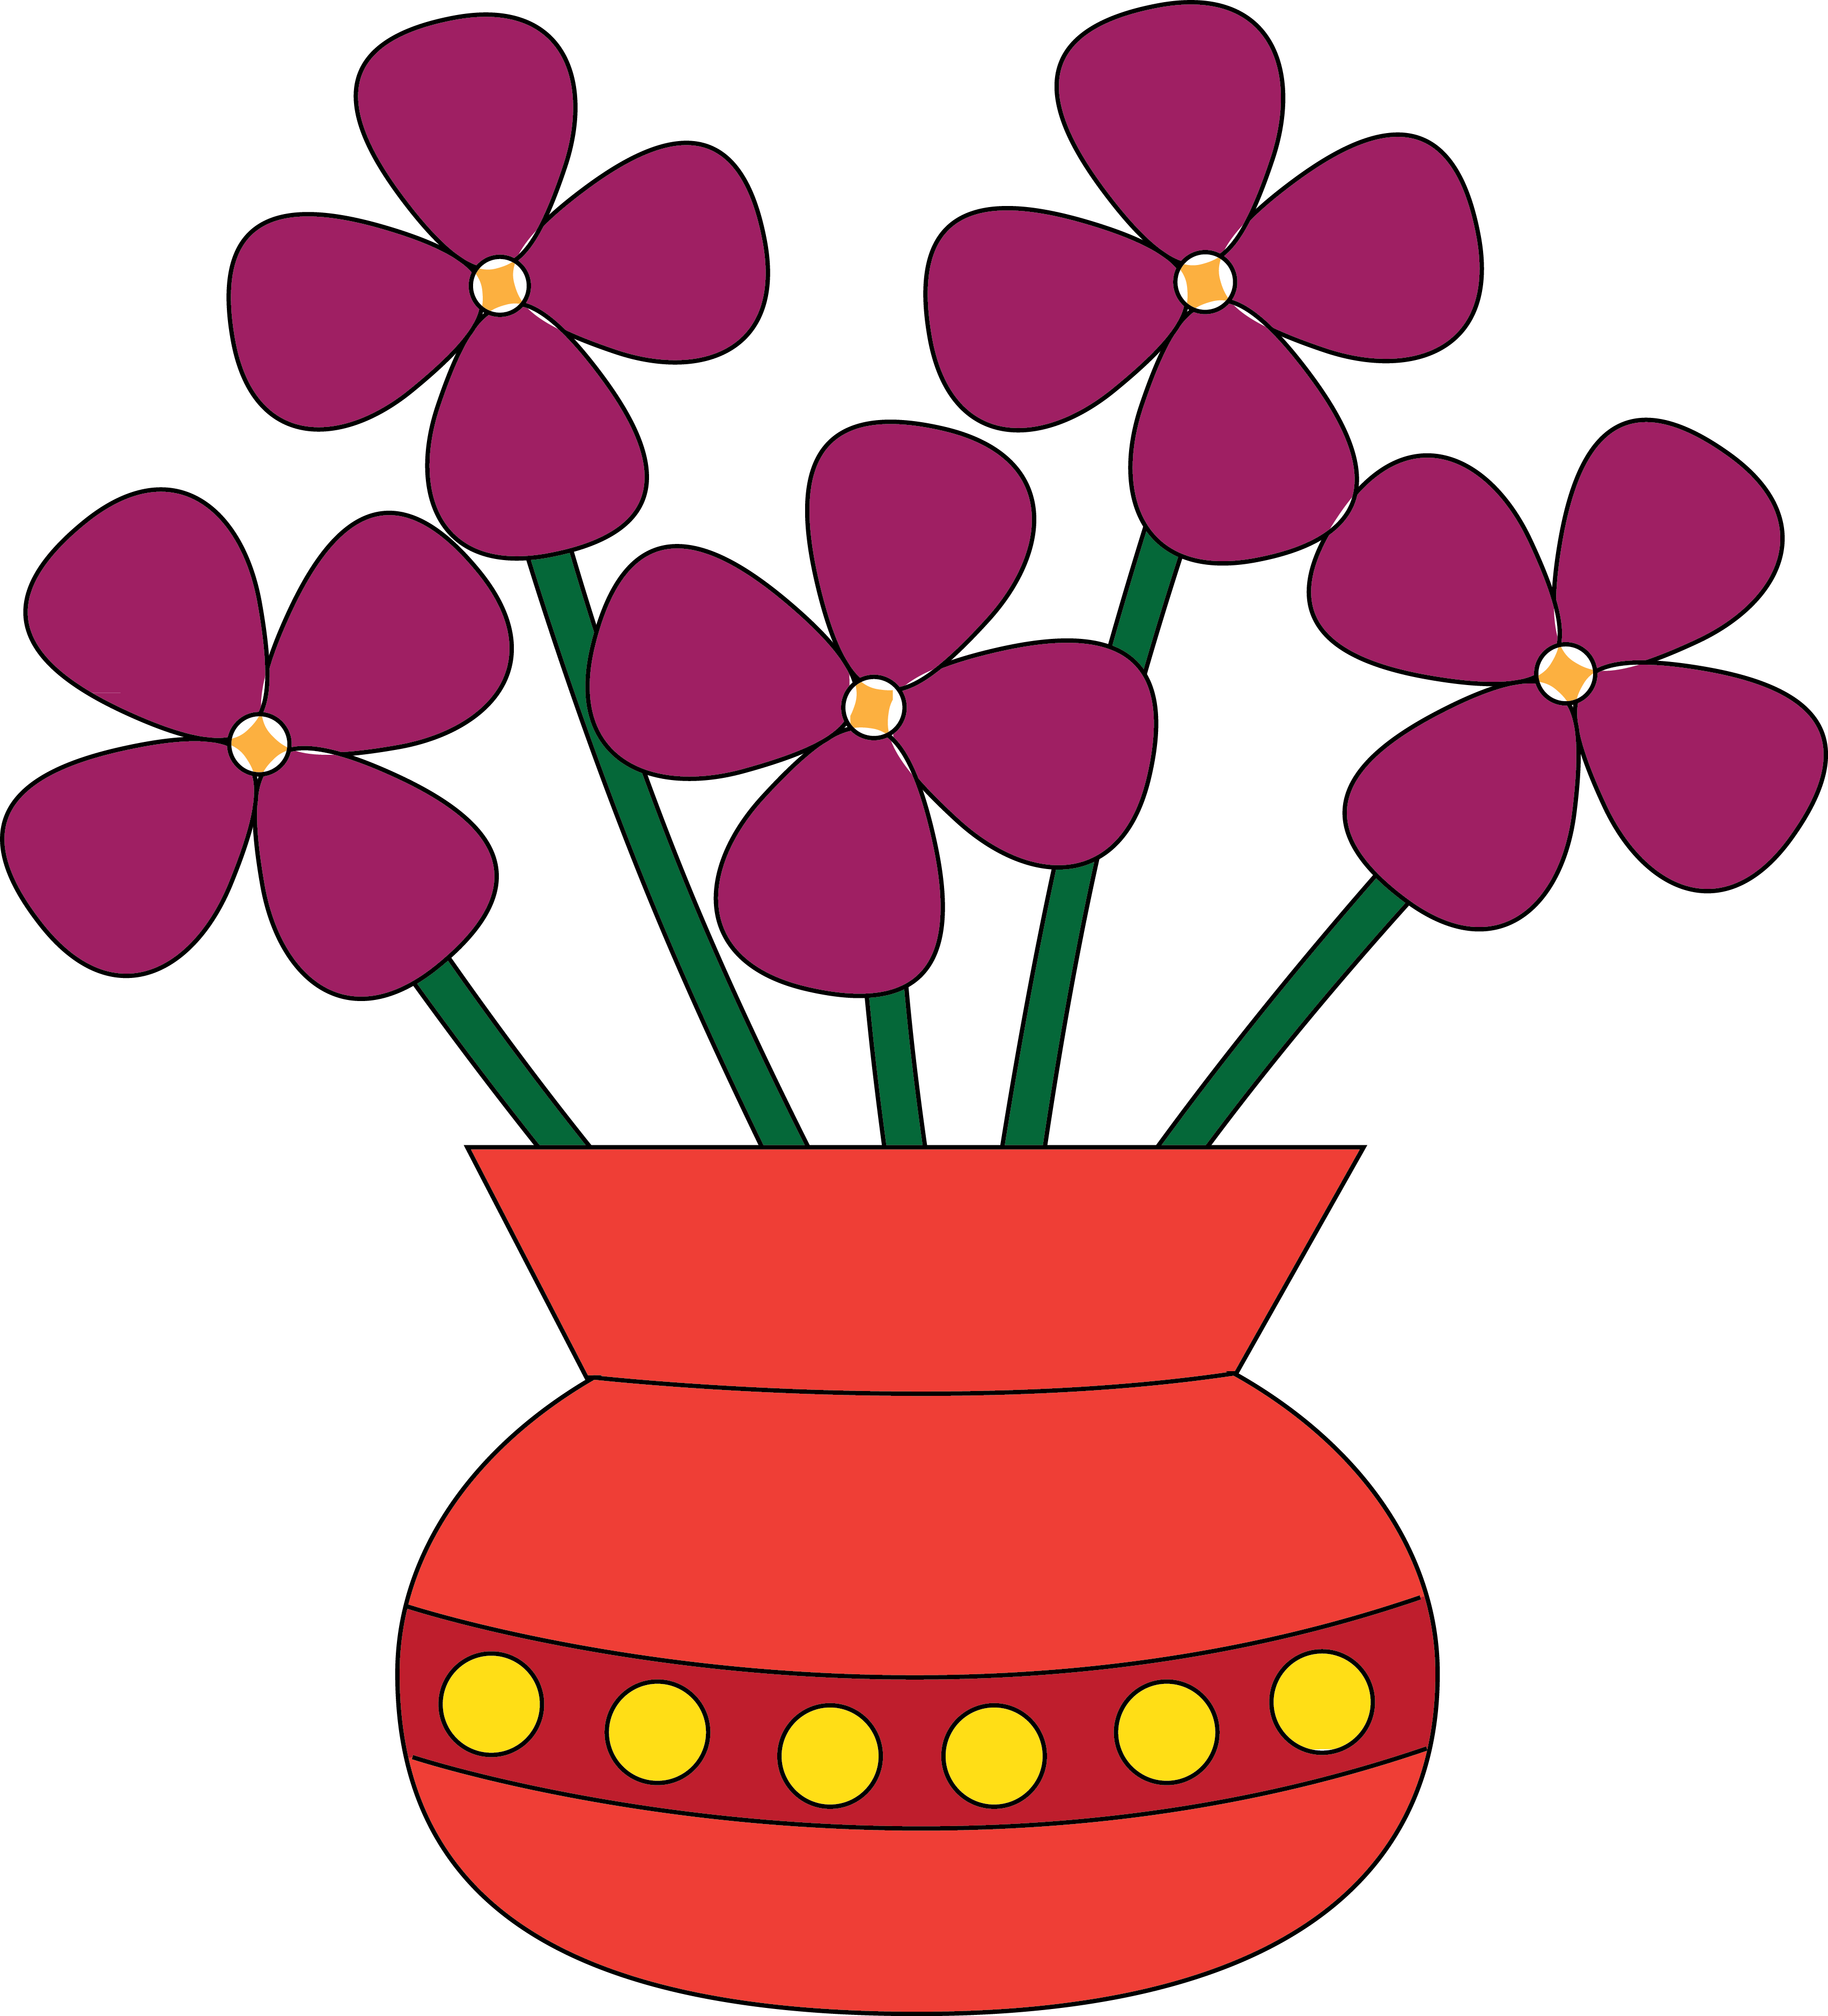 Flowers In A Vase Clipart   Clipart Panda   Free Clipart Images